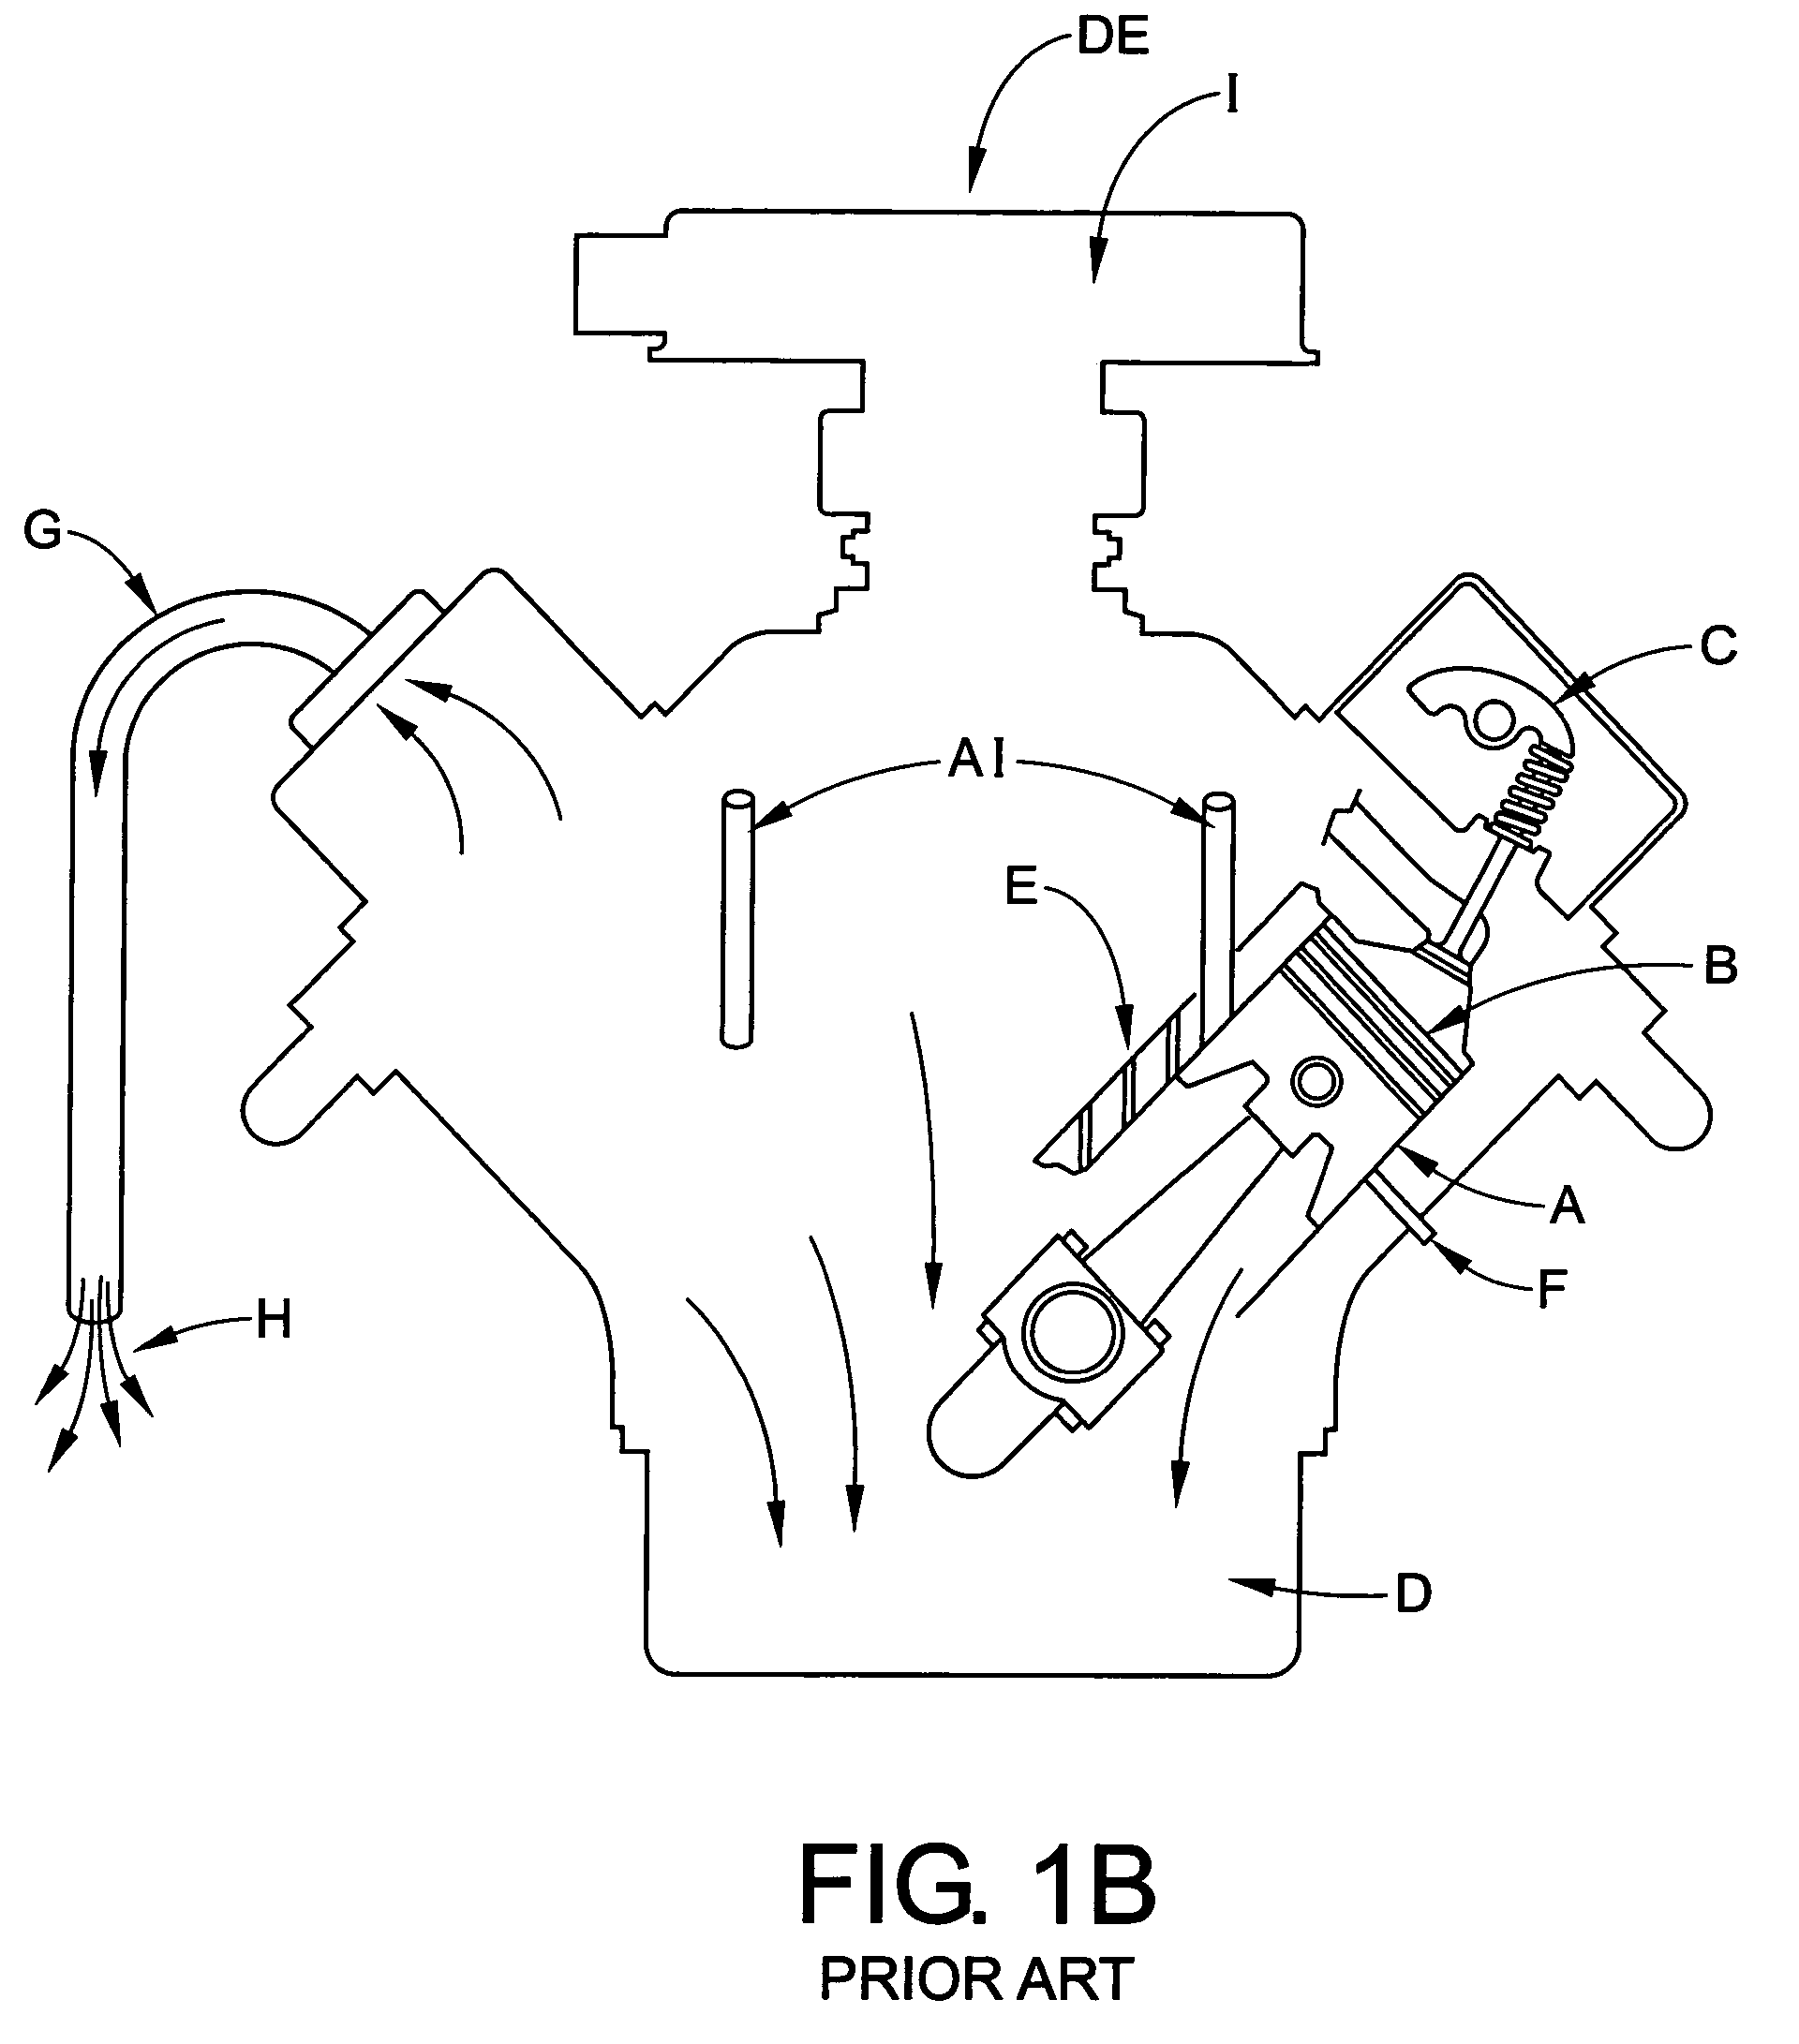 Apparatus for removing contaminants from crankcase emissions